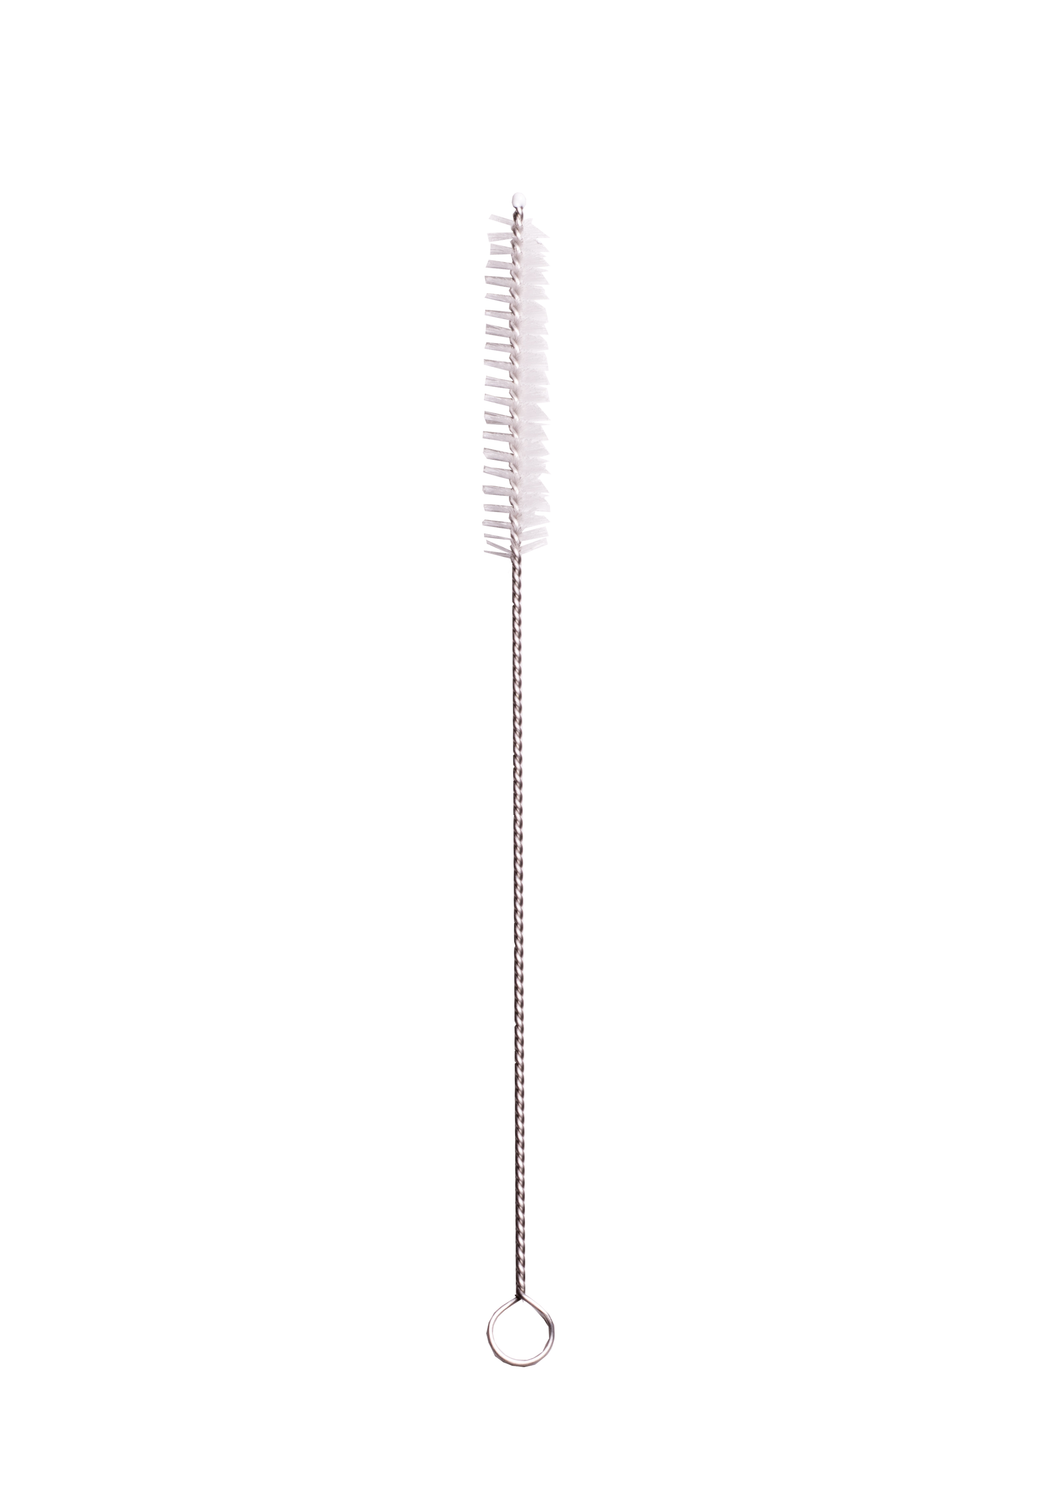 Z - Cleaning Brush (separate)